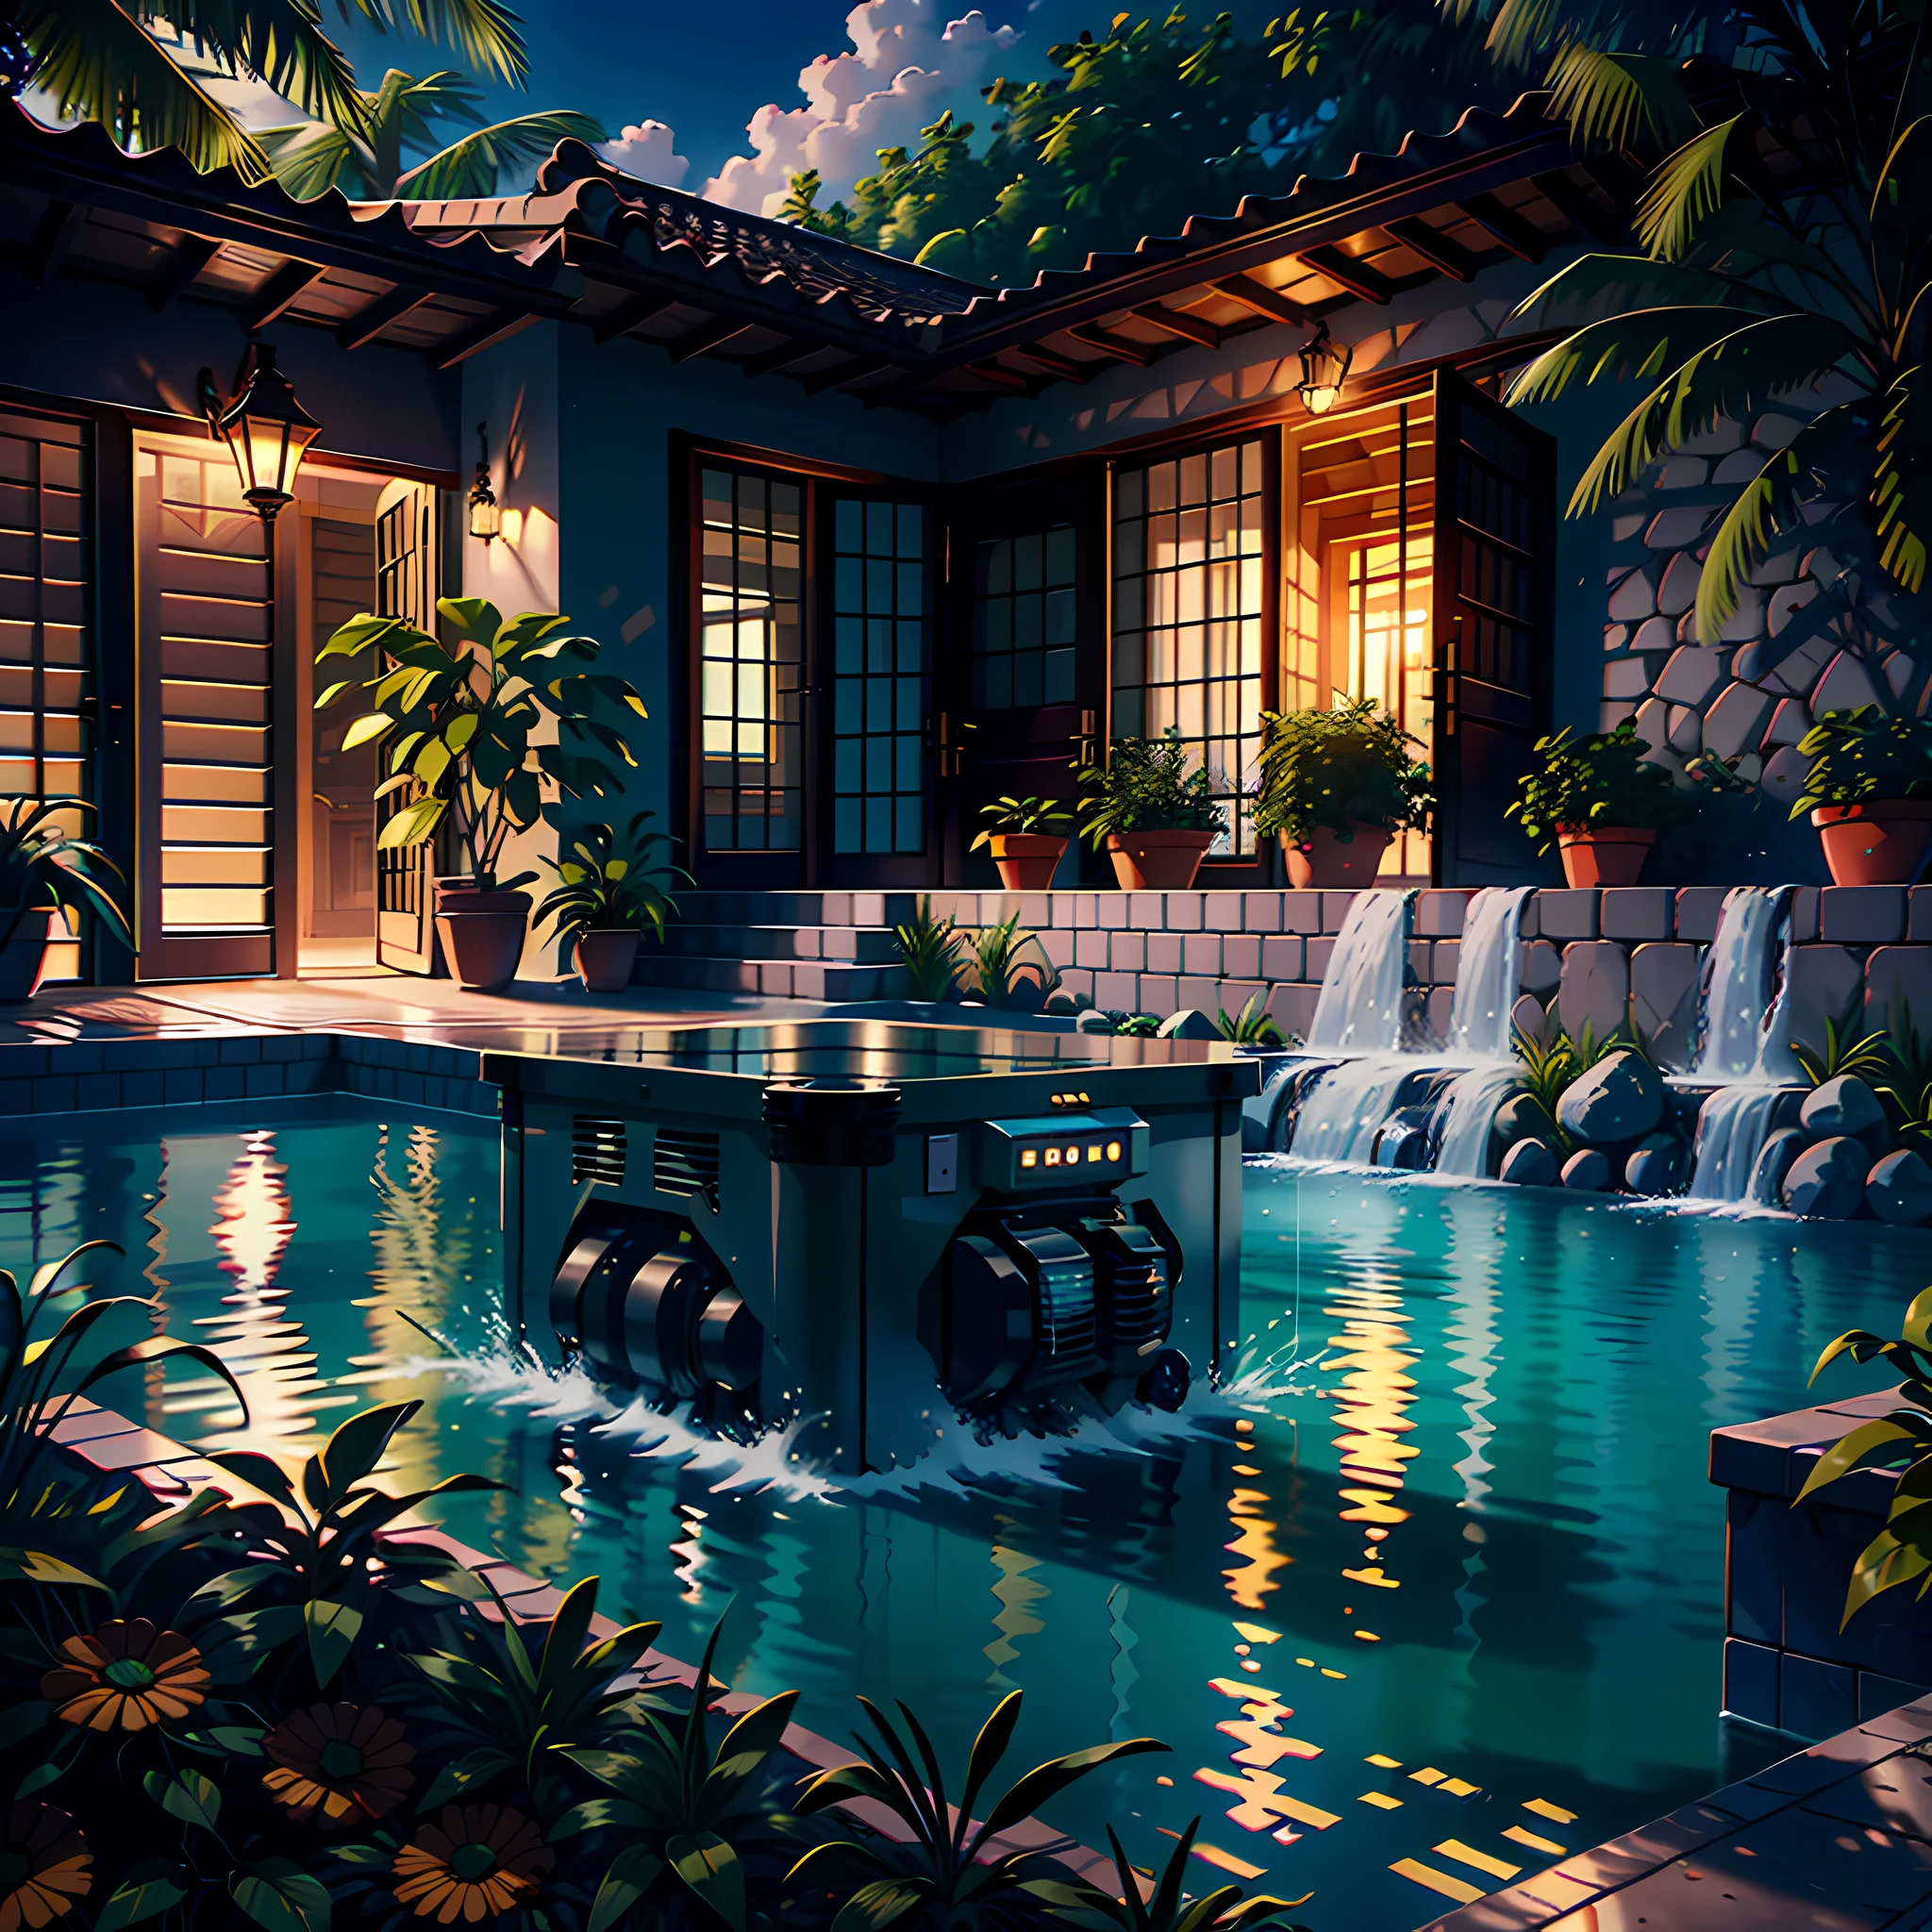 In the evening, next to the pool inside the villa, there is a set of generator equipment, ultra detail, highly real, 4K, chiaroscuro, super high detail